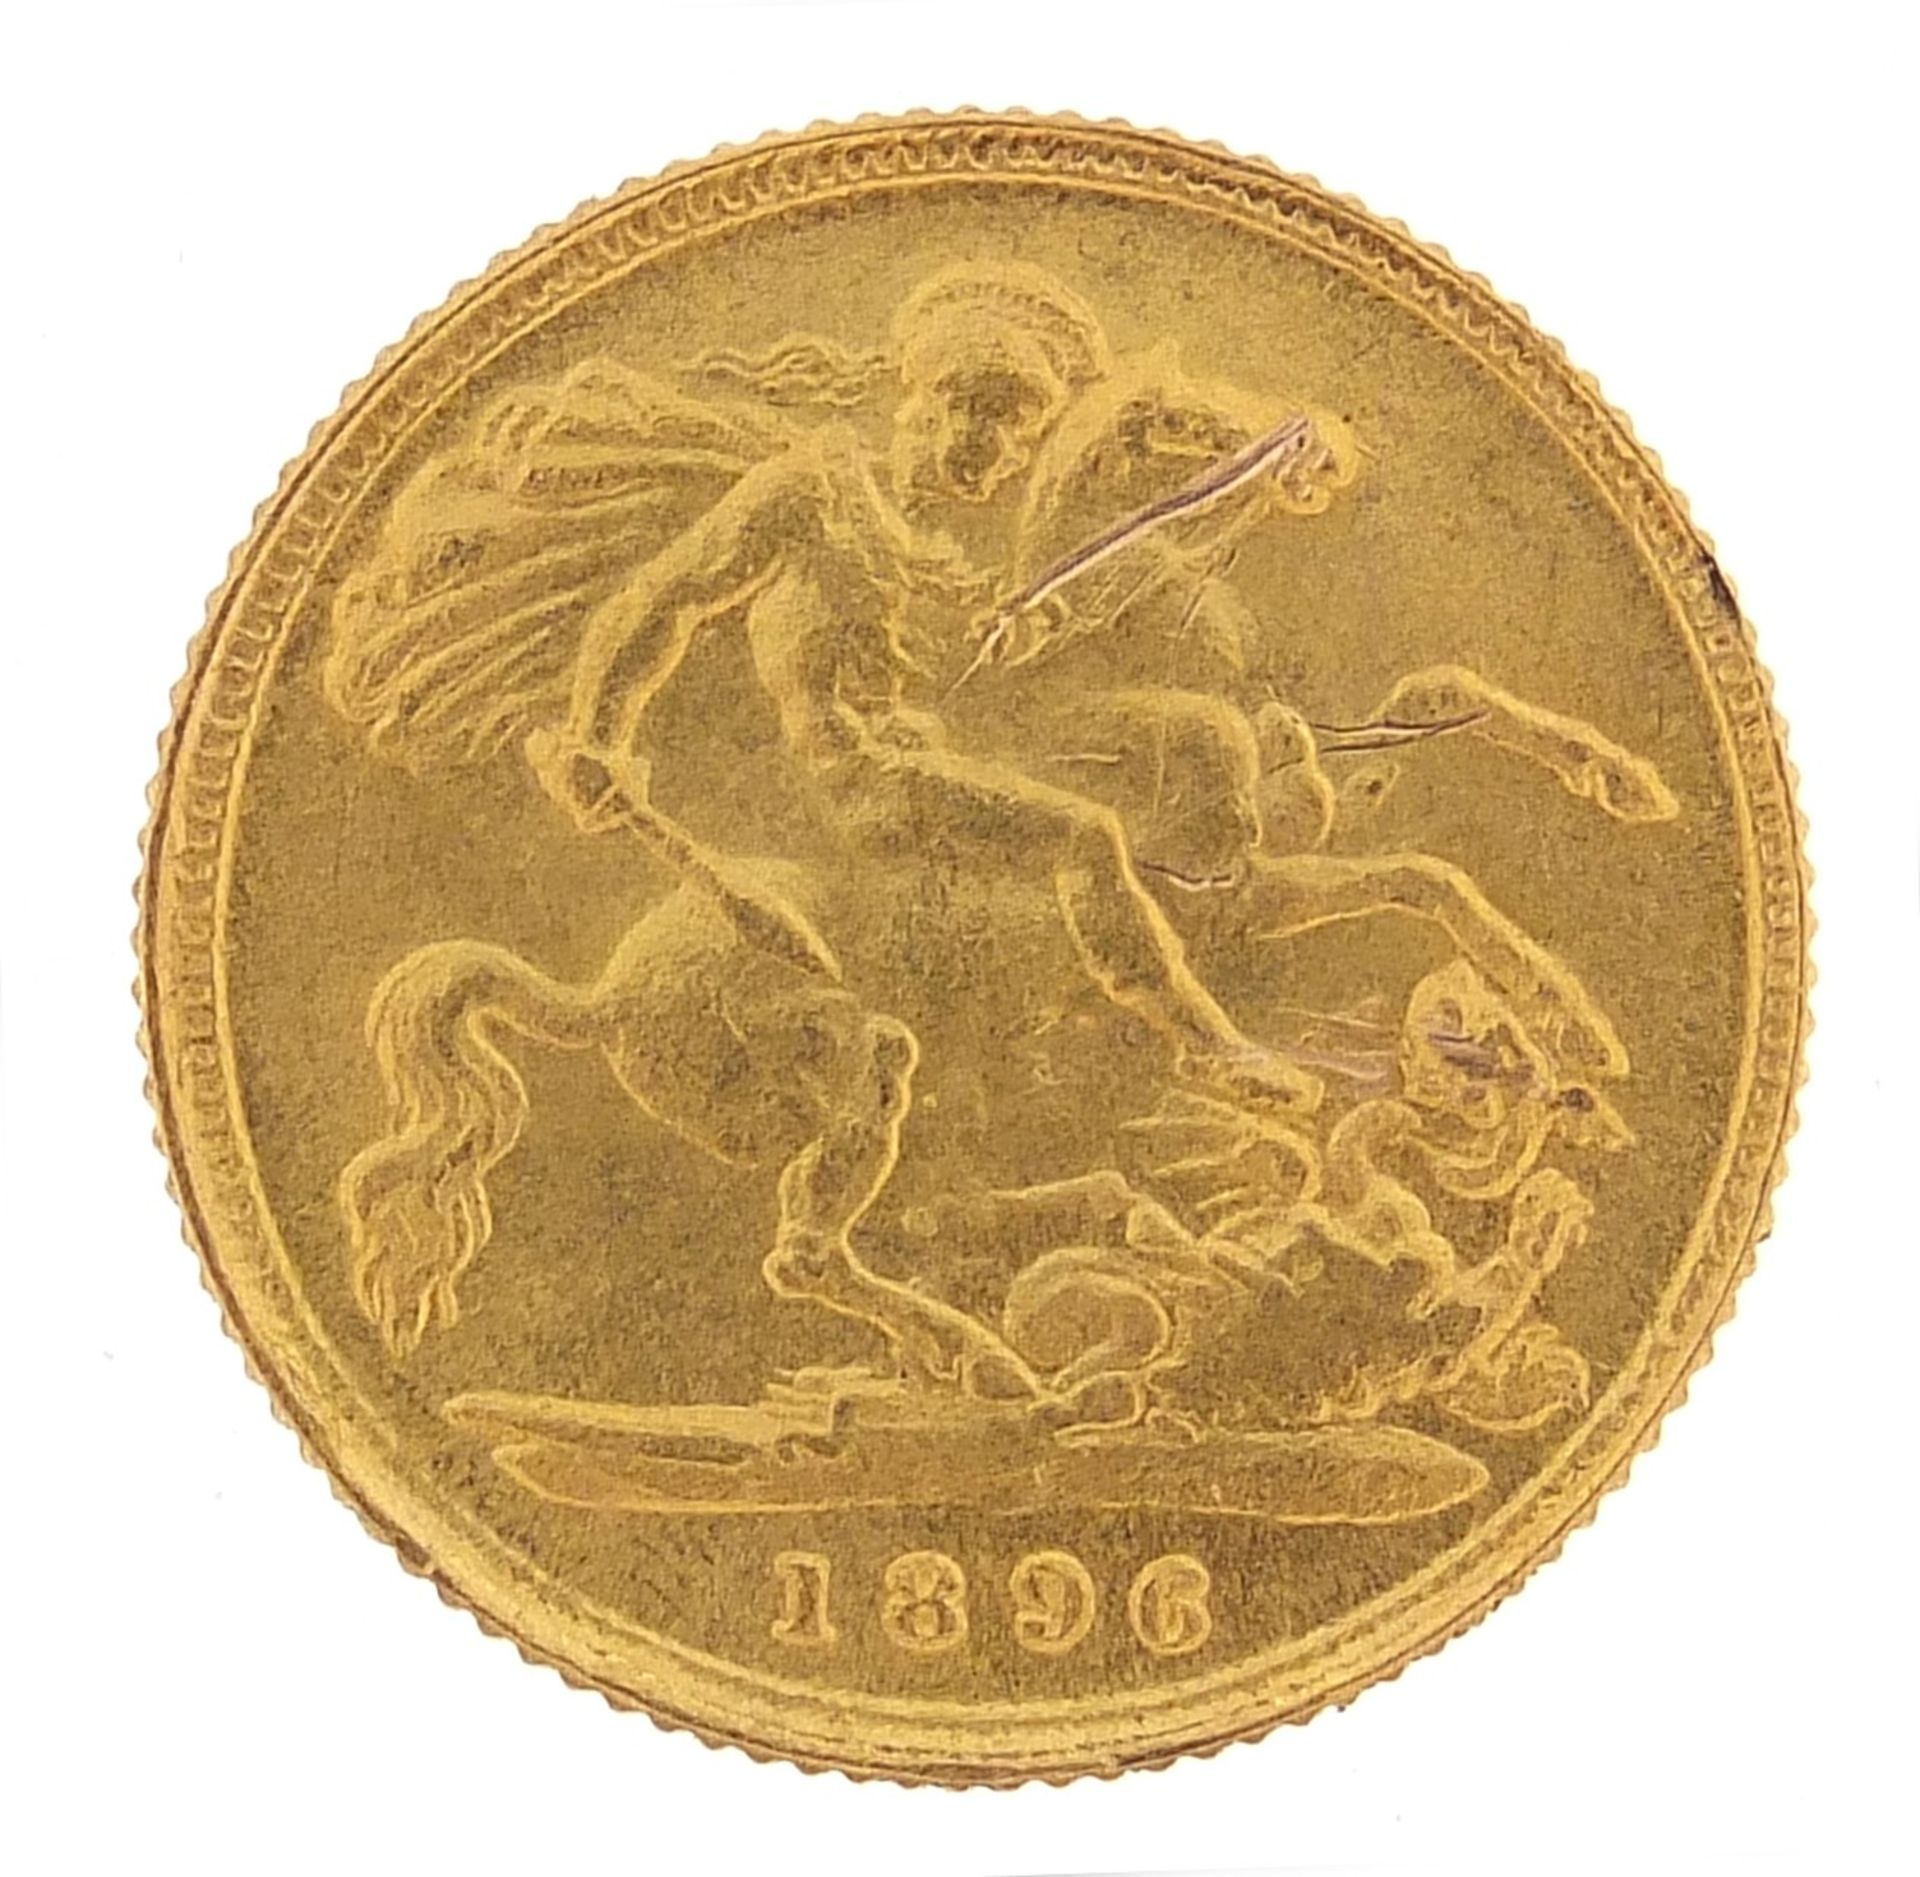 Queen Victoria 1896 gold half sovereign, - this lot is sold without buyer's premium